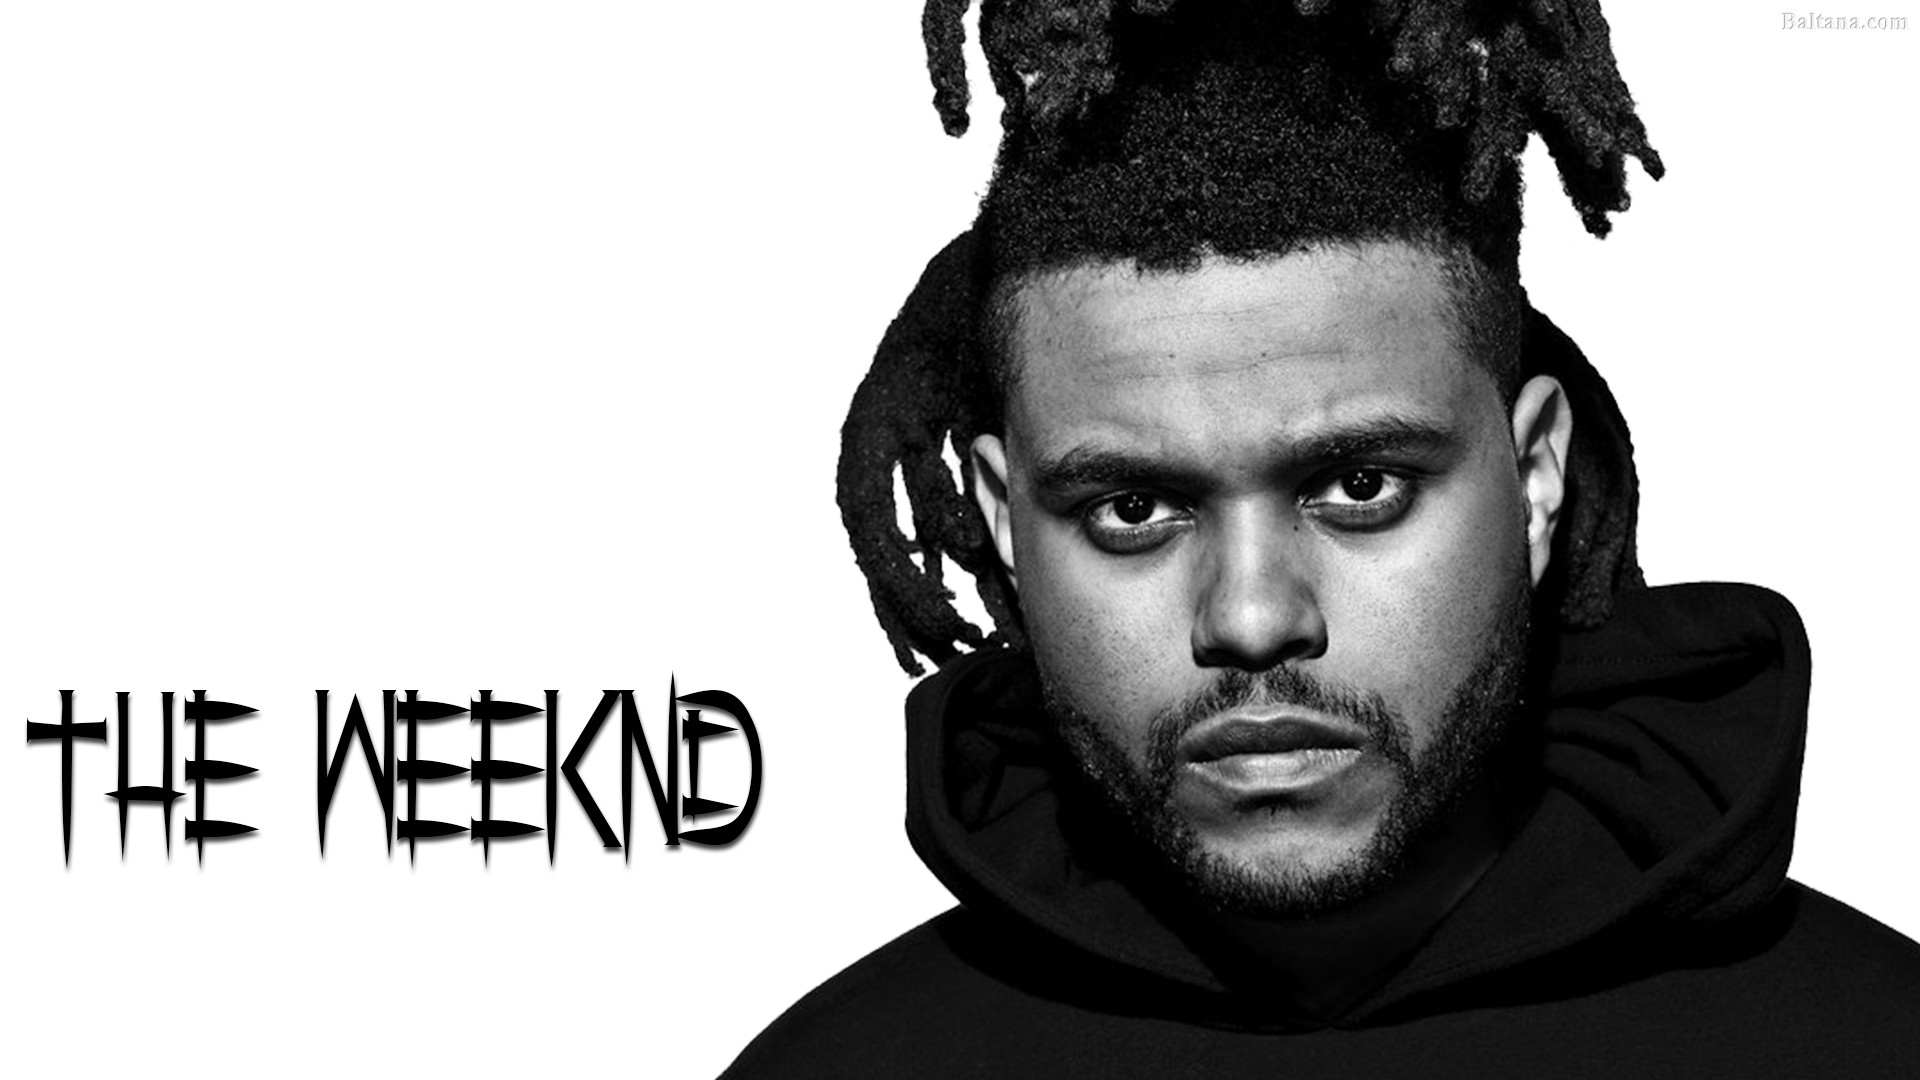 Thinking about the weekend. The Weeknd. Уикенд певец. The Weeknd на белом фоне. The Weeknd 2023.